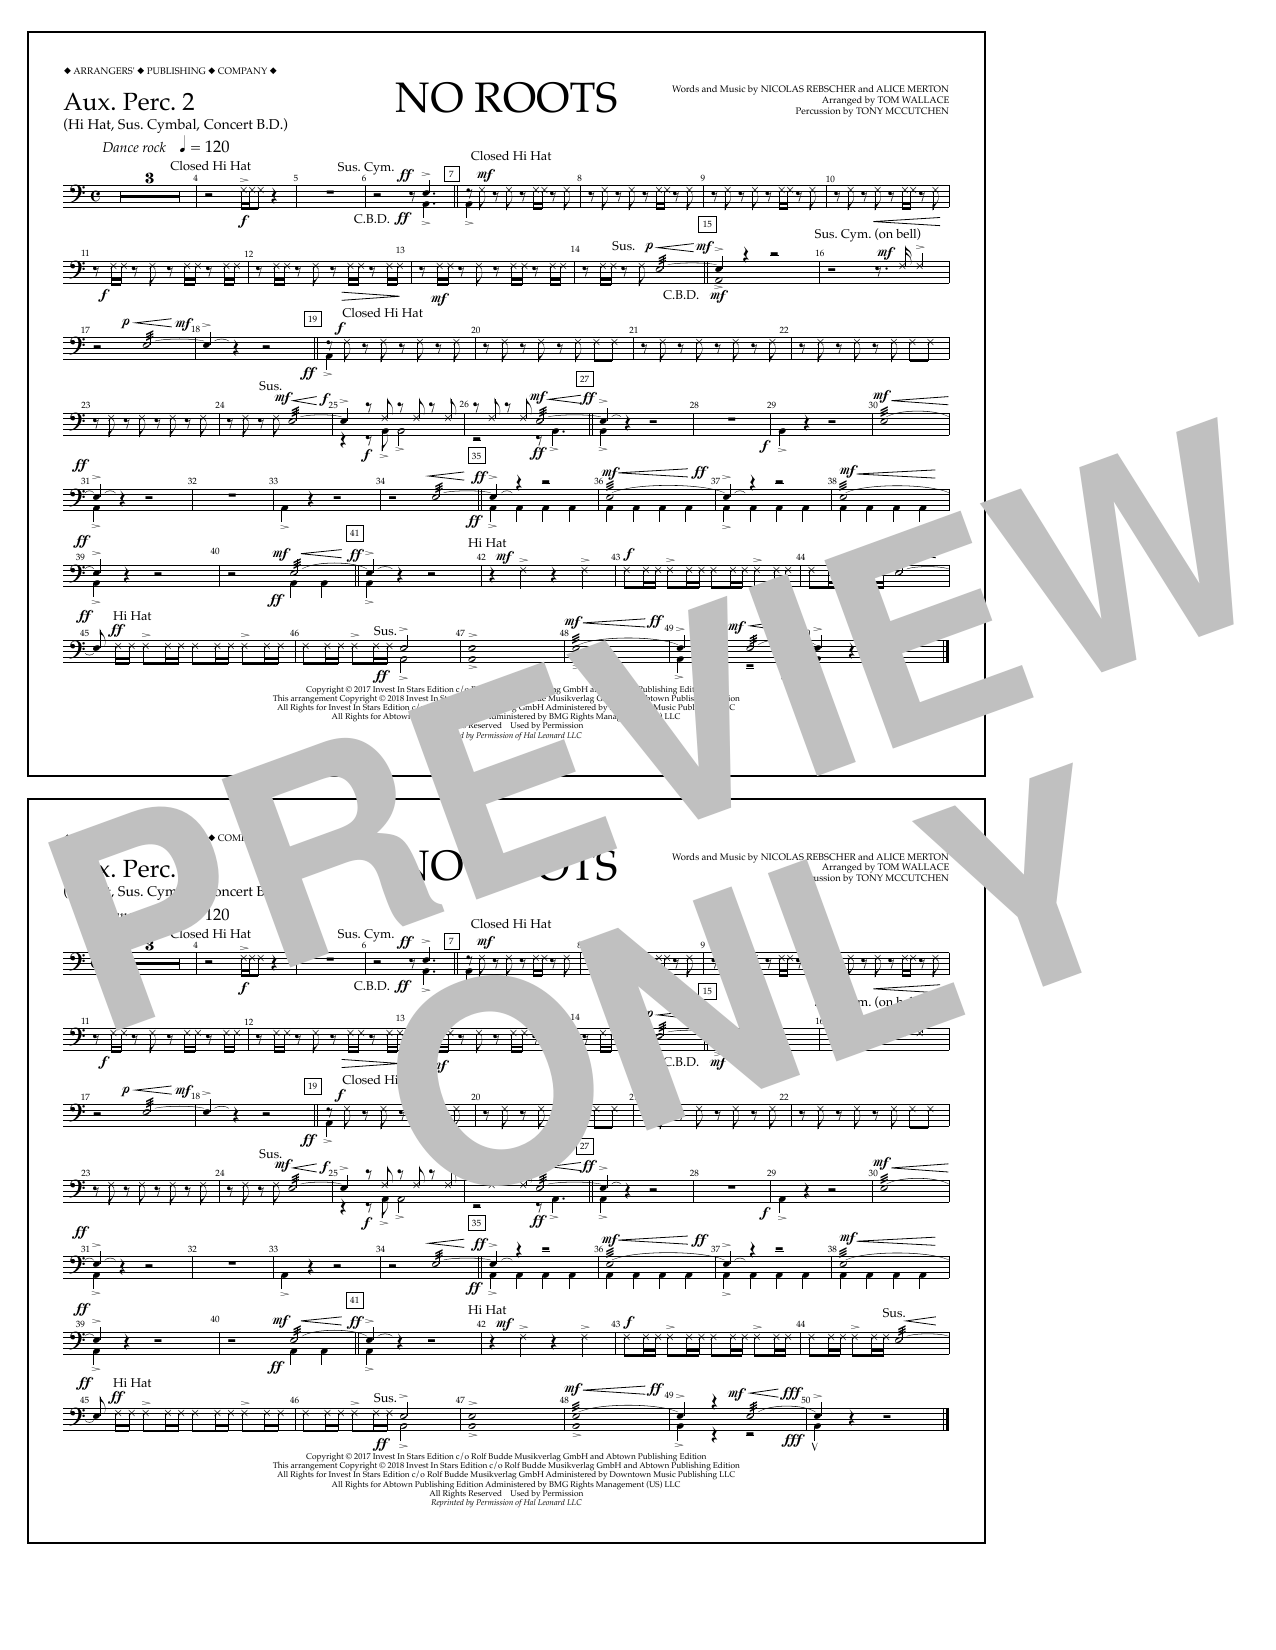 Download Tom Wallace No Roots - Aux. Perc. 2 Sheet Music